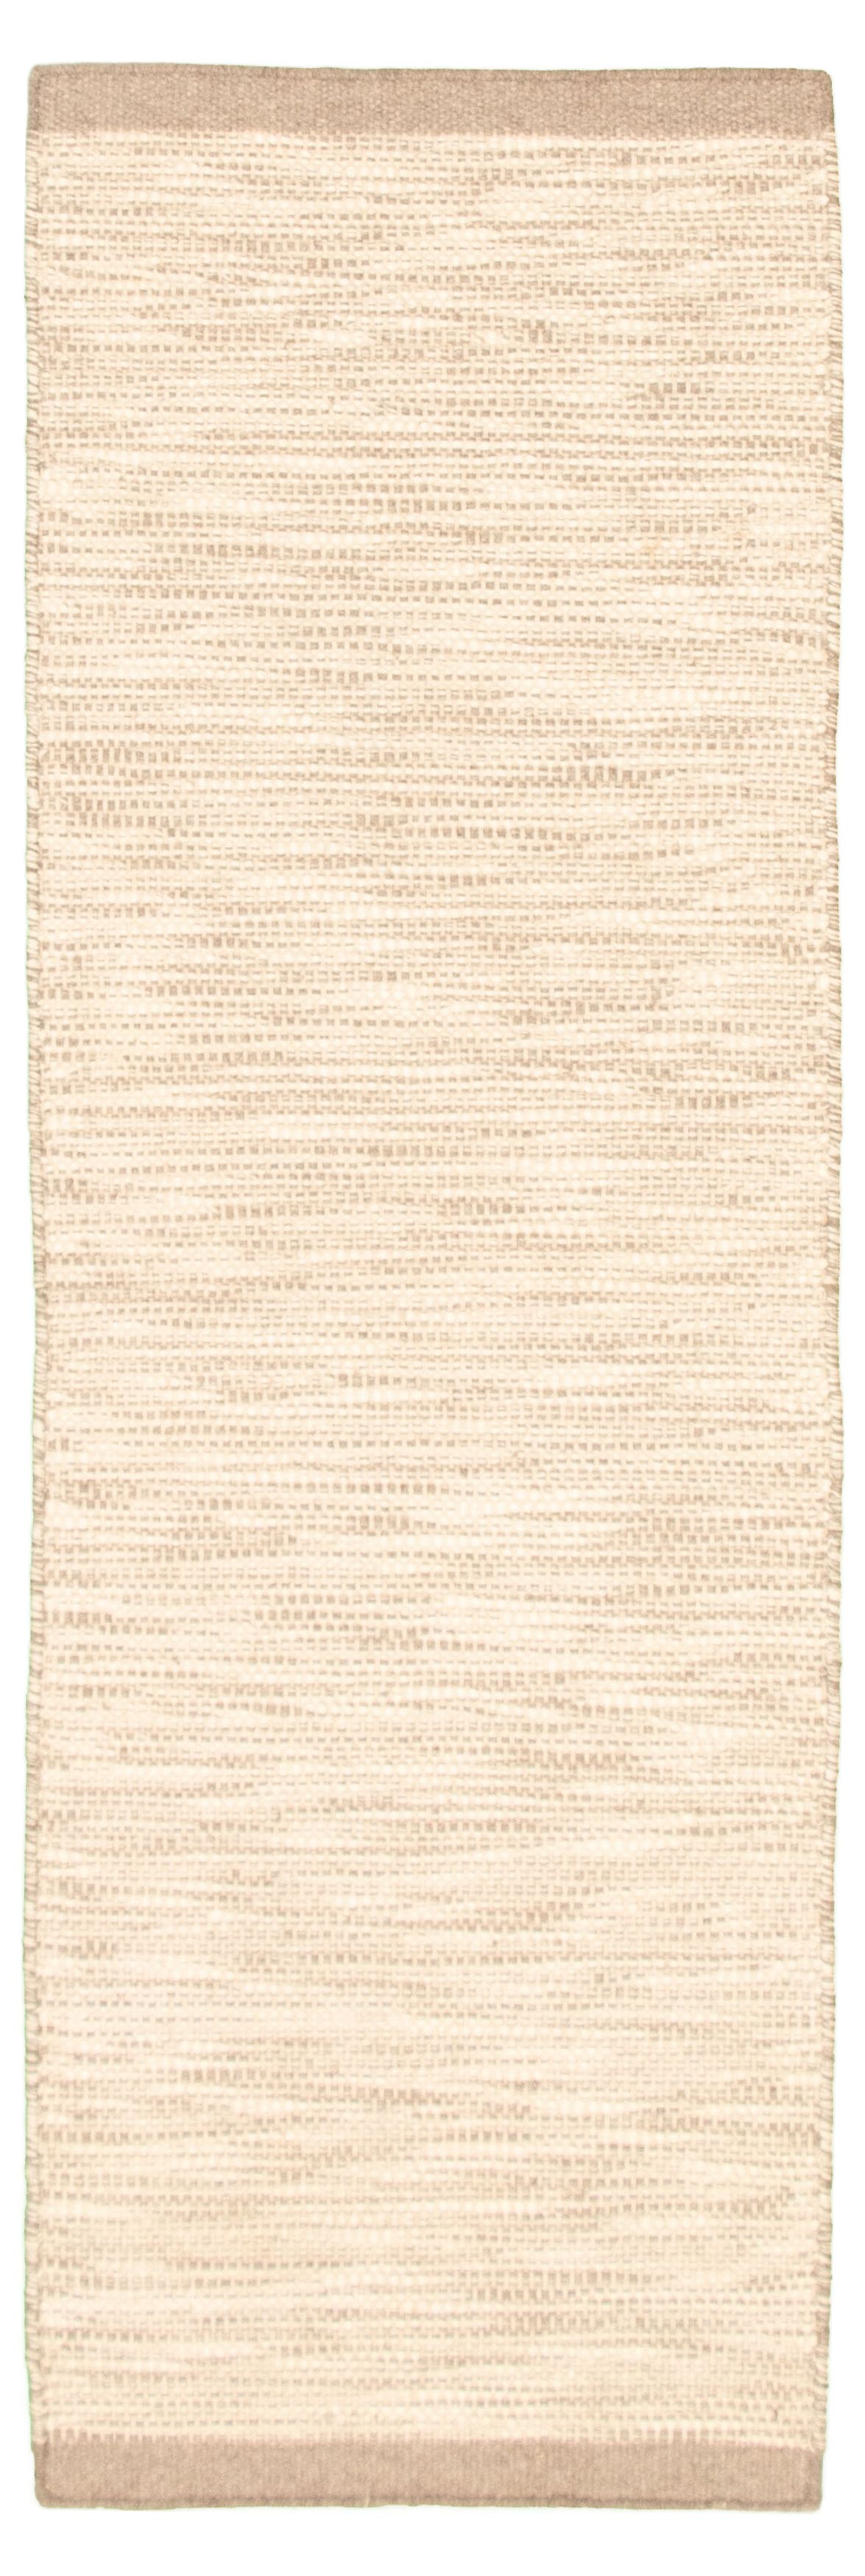 Hand loomed Bungalow BRC Cream, Tan Wool Dhurrie 2'8" x 8'2" Size: 2'8" x 8'2"  